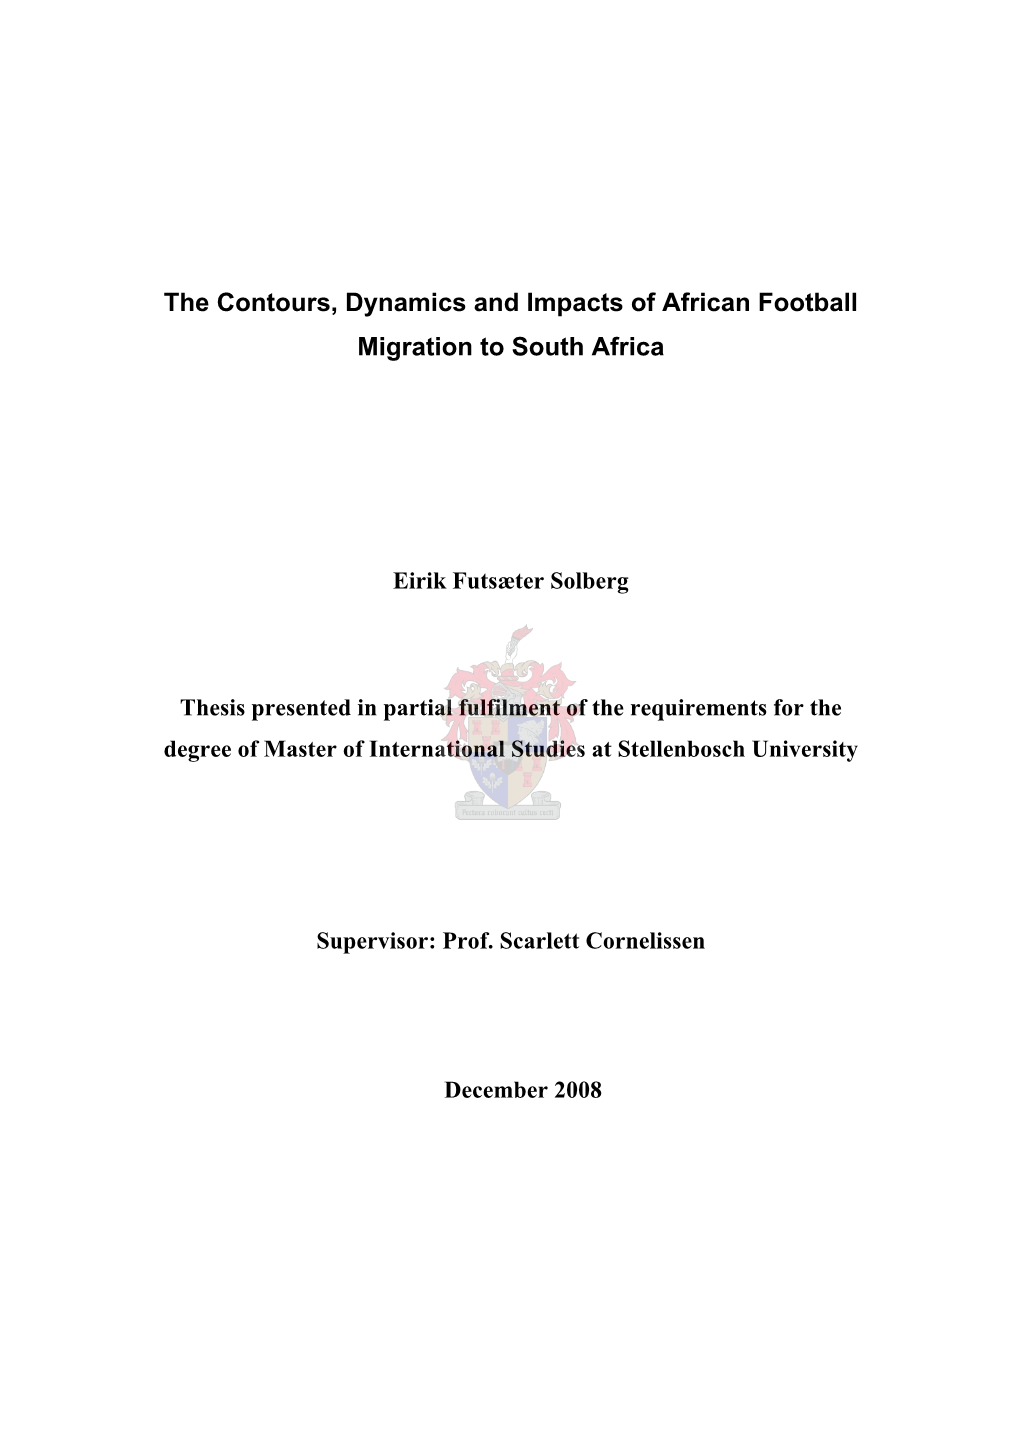 The Contours, Dynamics and Impacts of African Football Migration to South Africa